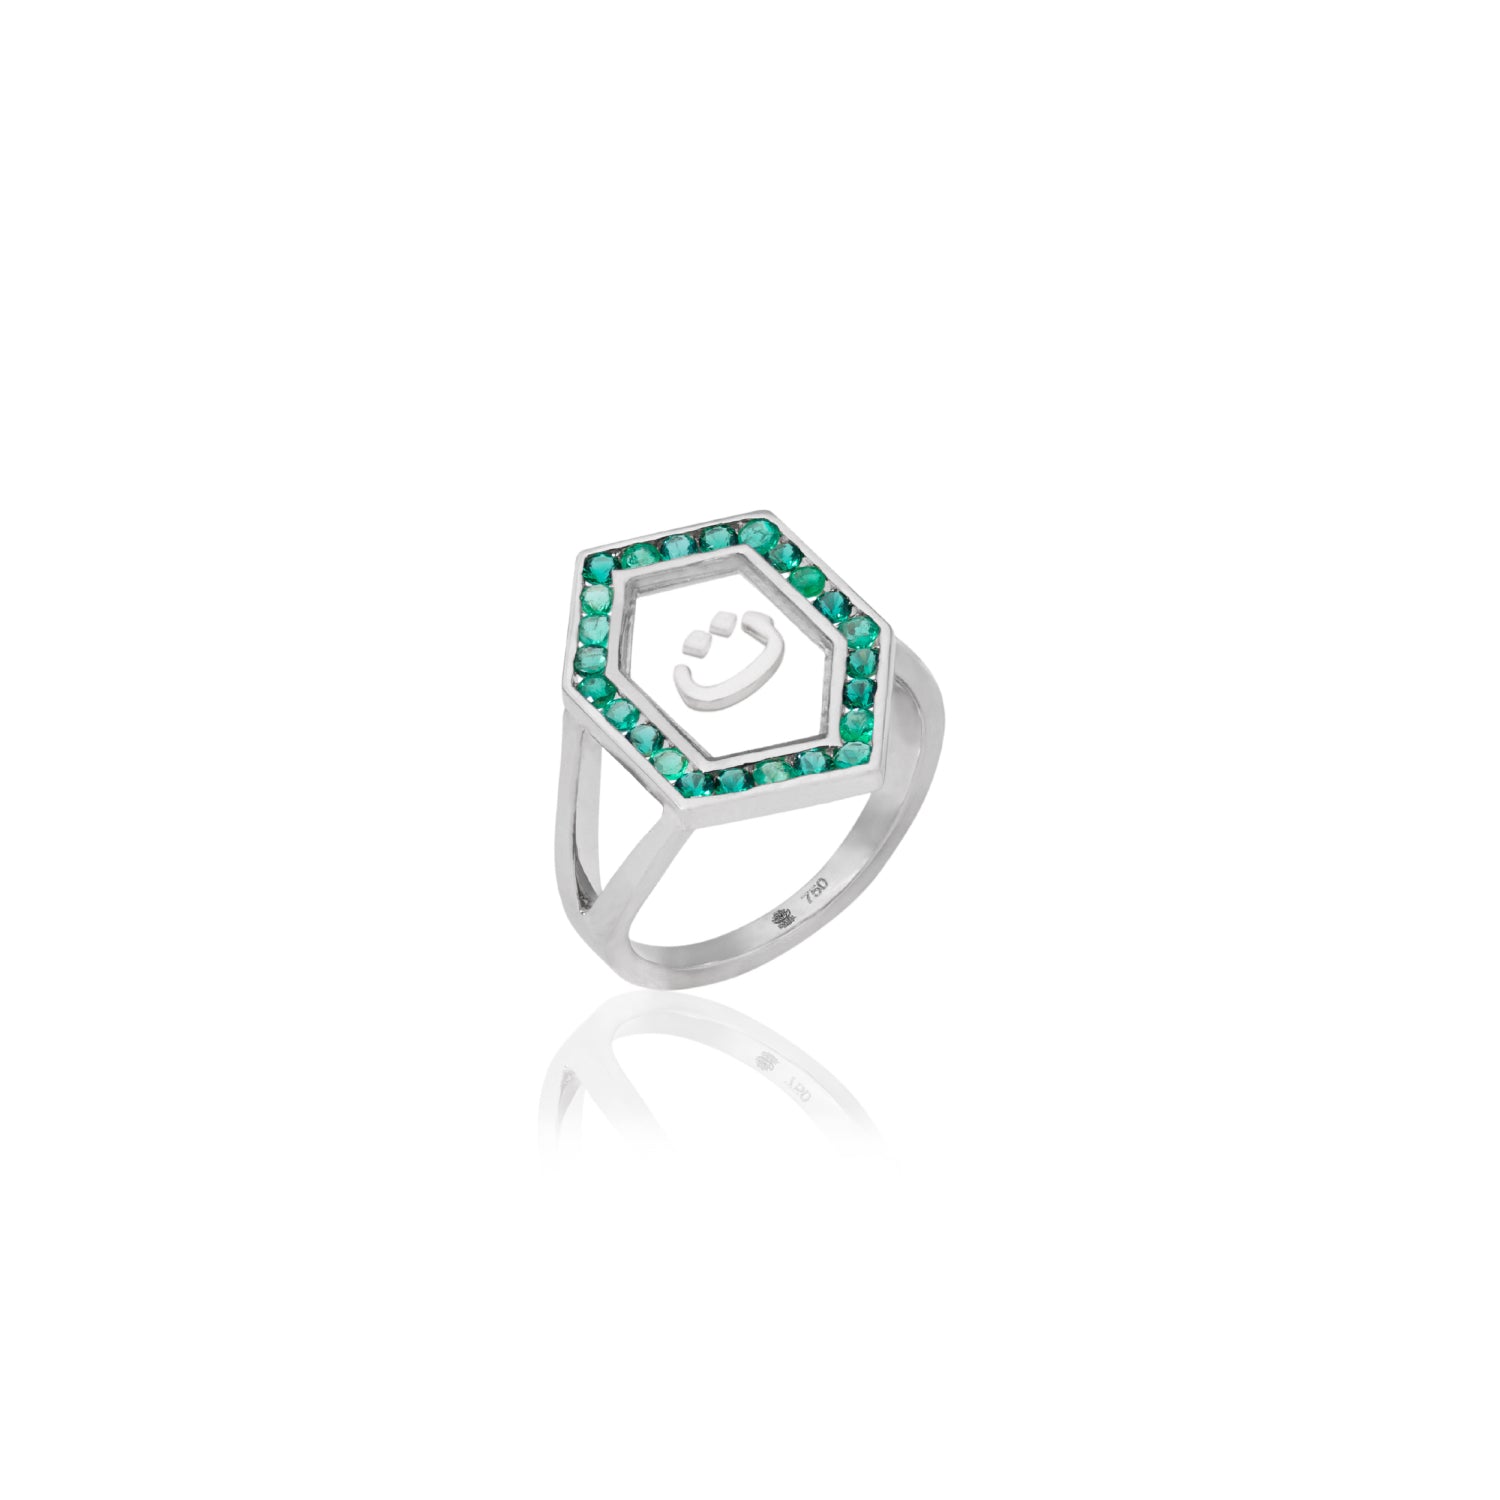 Qamoos 1.0 Letter ت Emerald Ring in White Gold